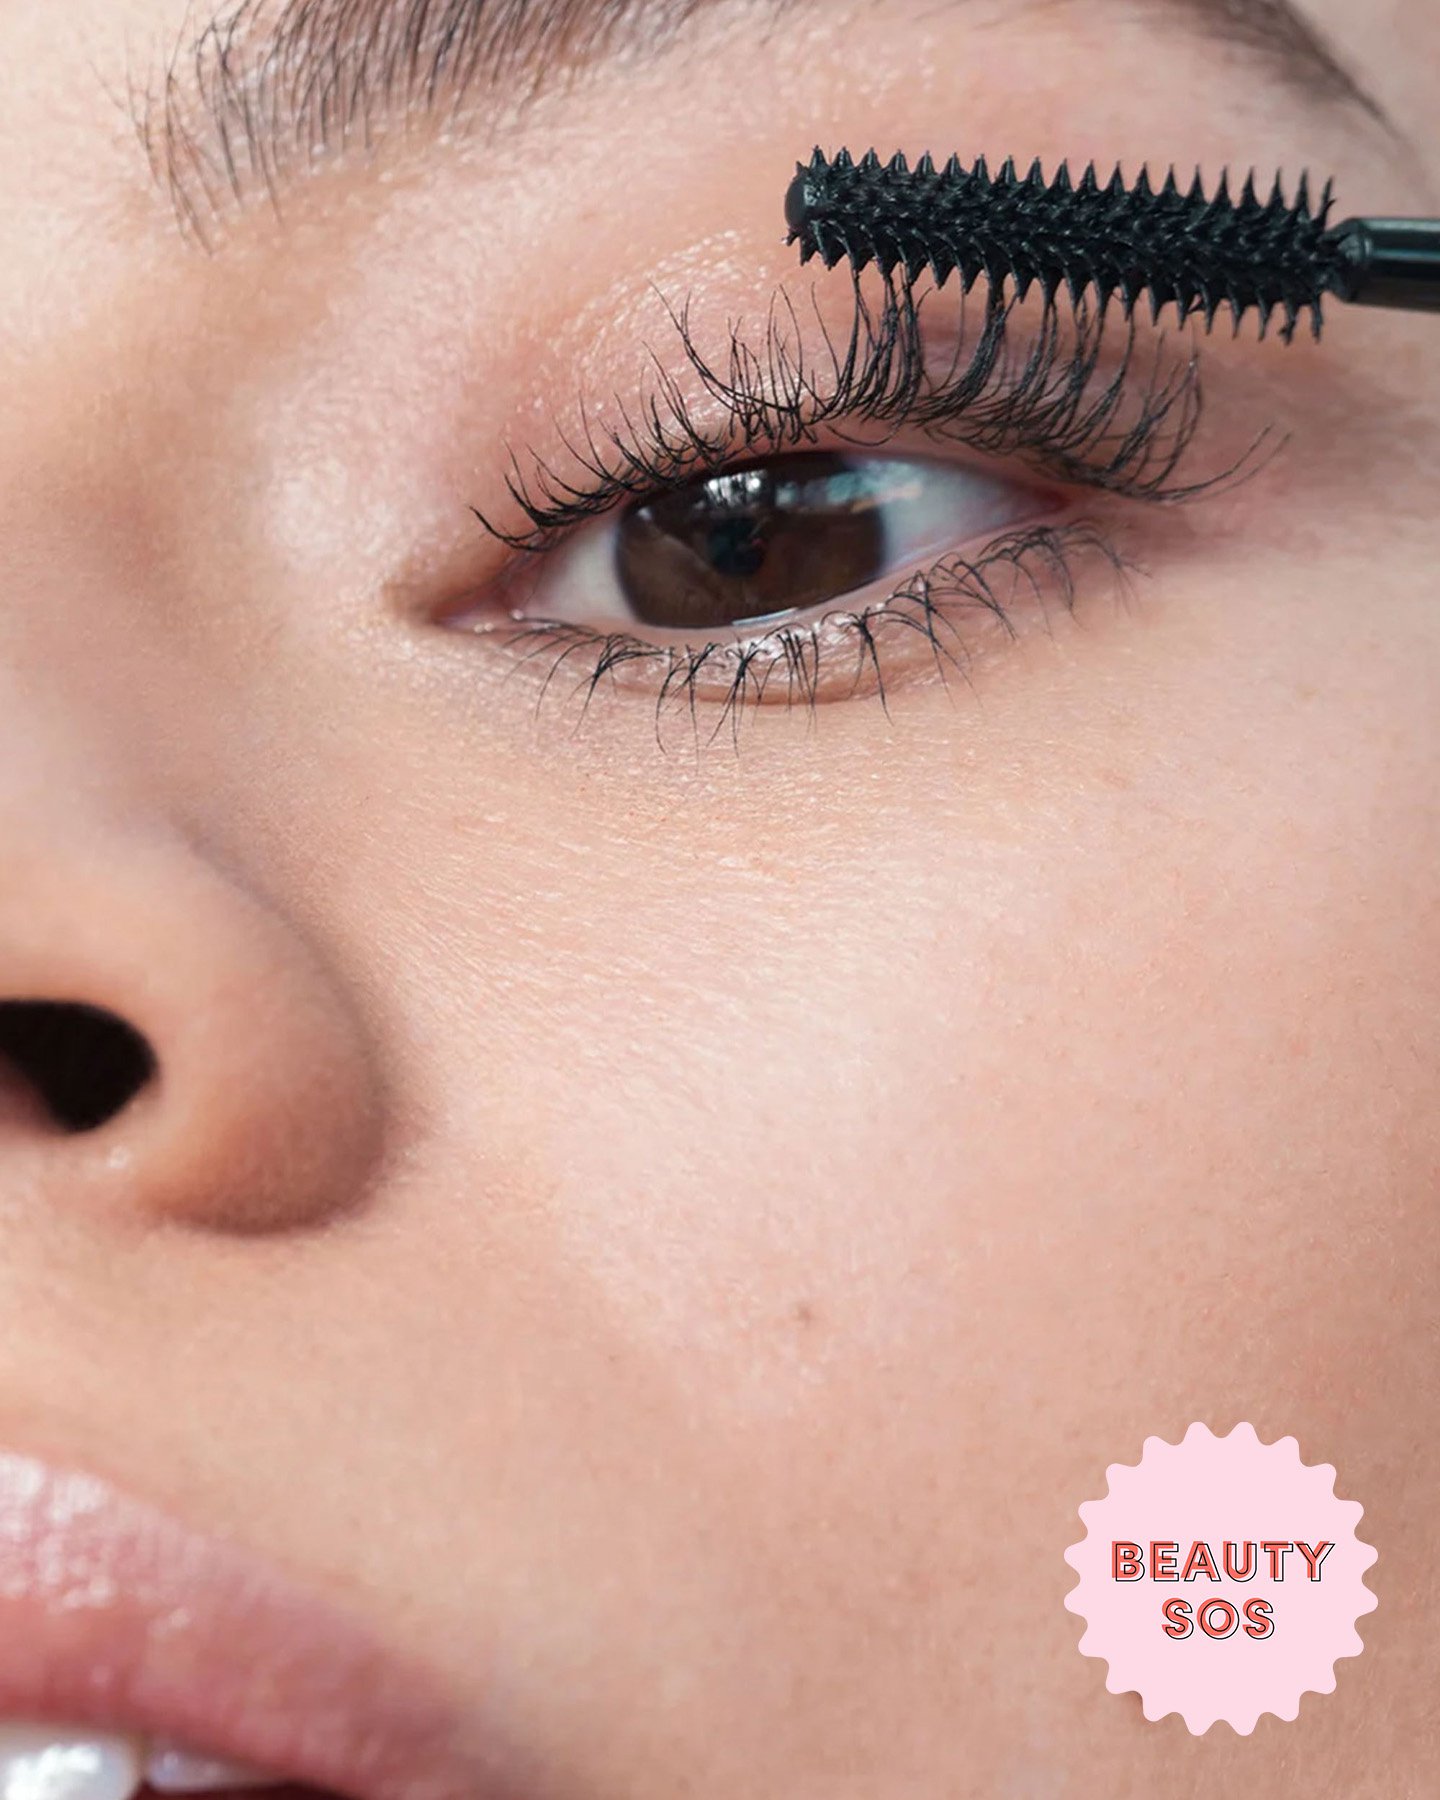 How To Apply Mascara So It Doesn't Smudge, Clump Or Flake